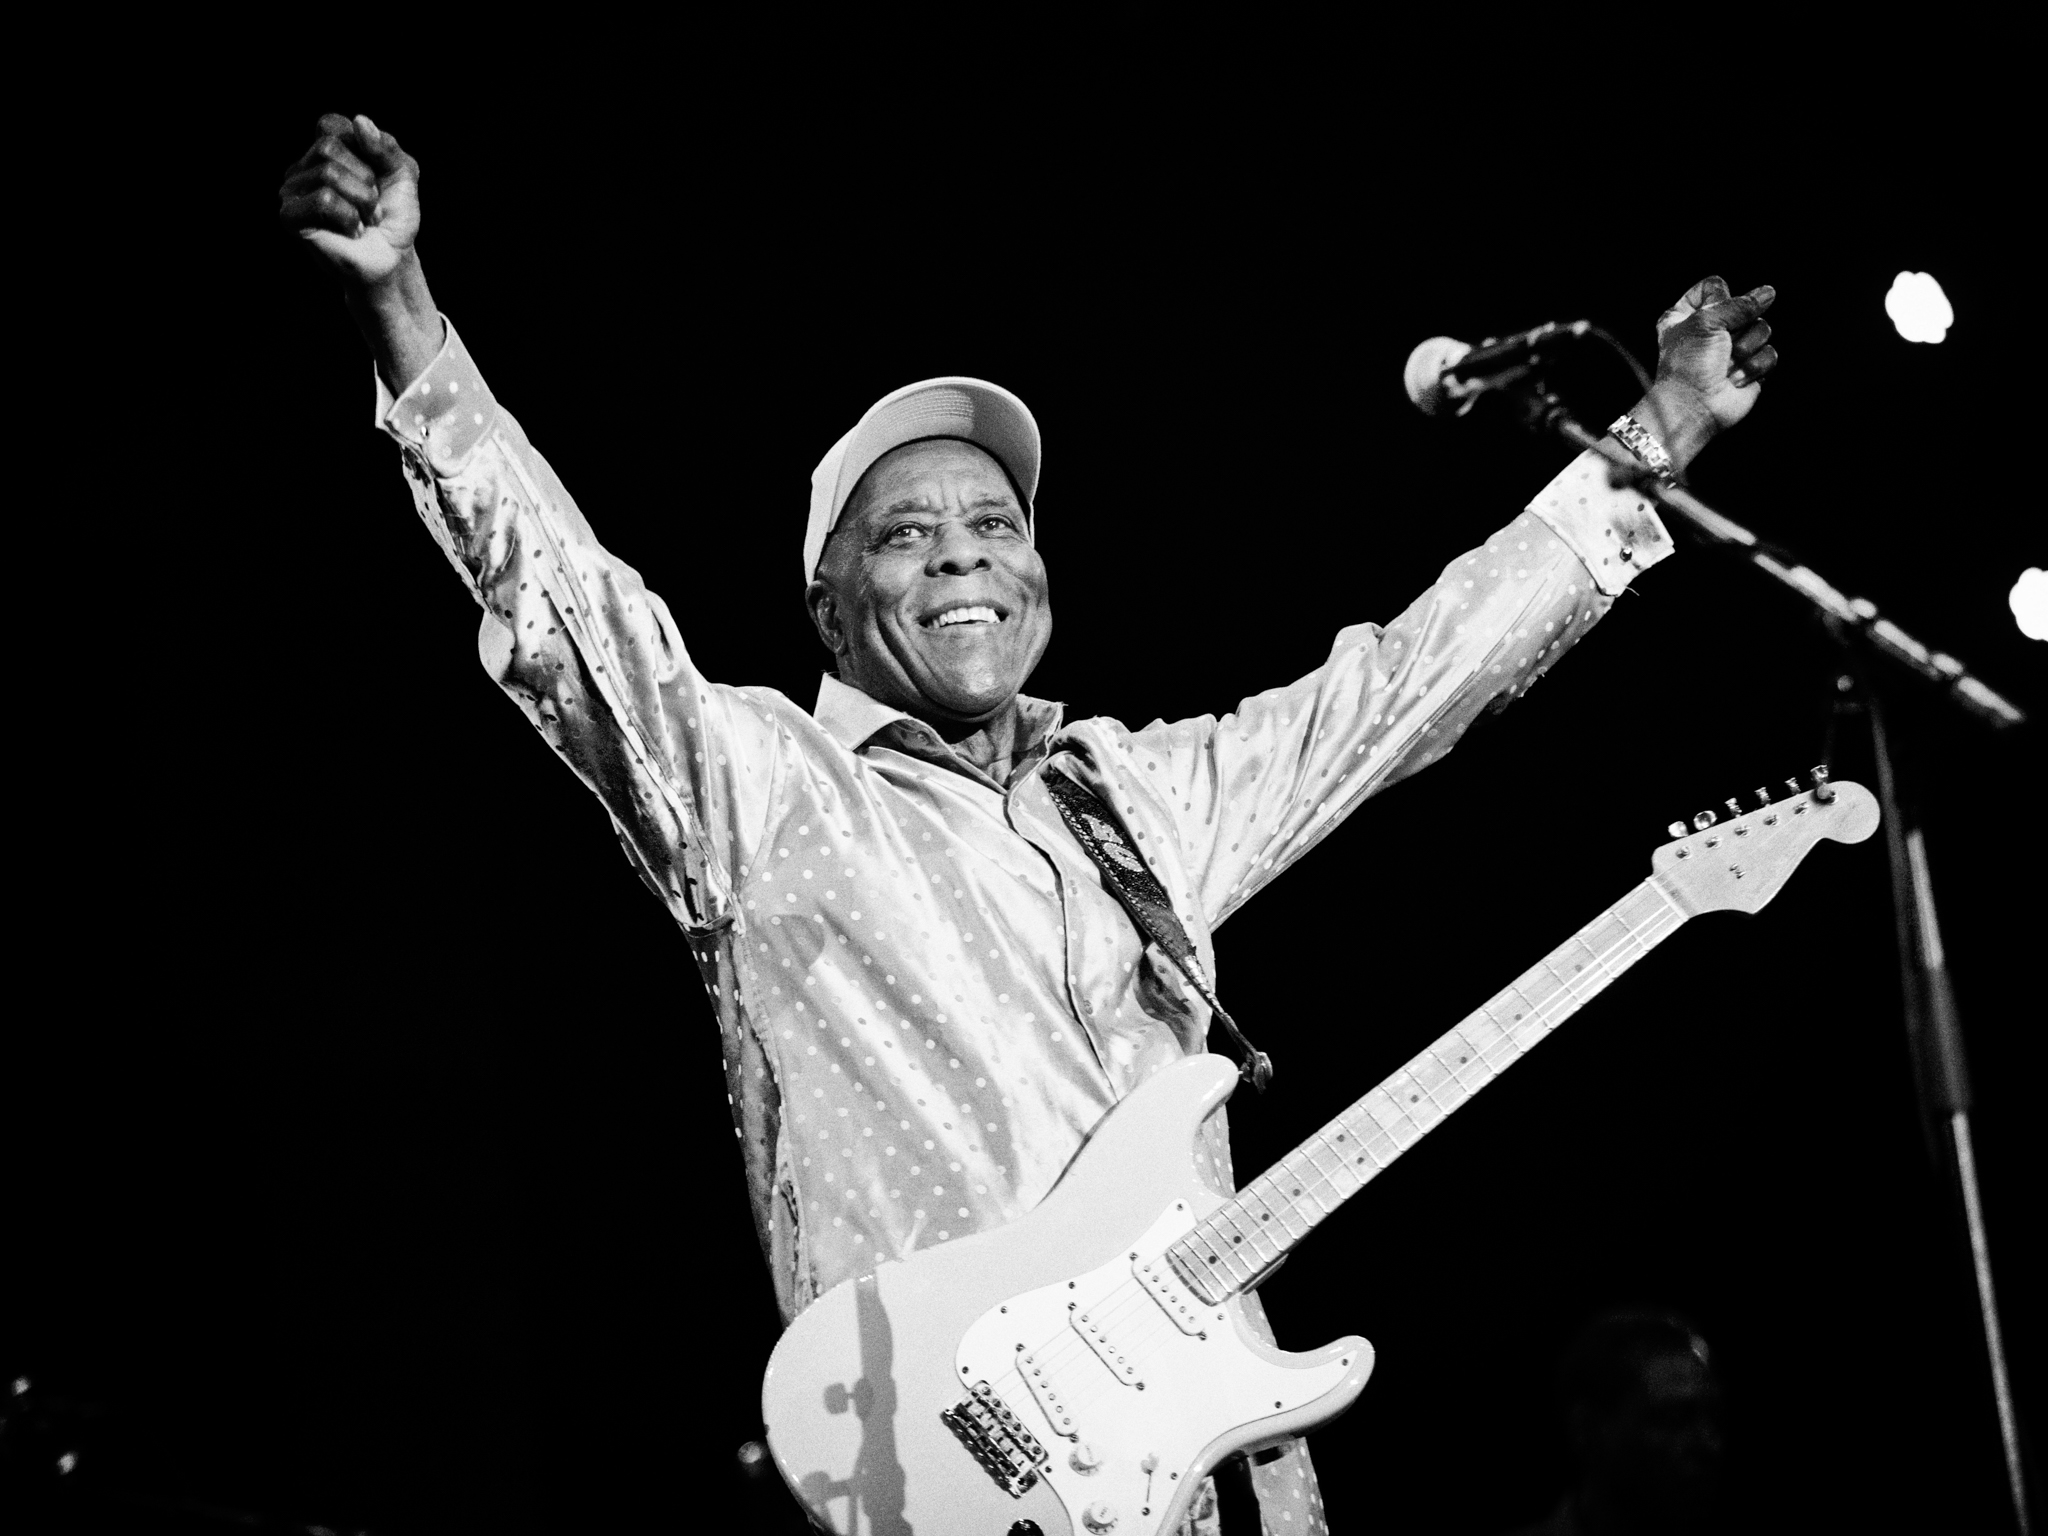 Buddy Guy by Bullet-ray Photography